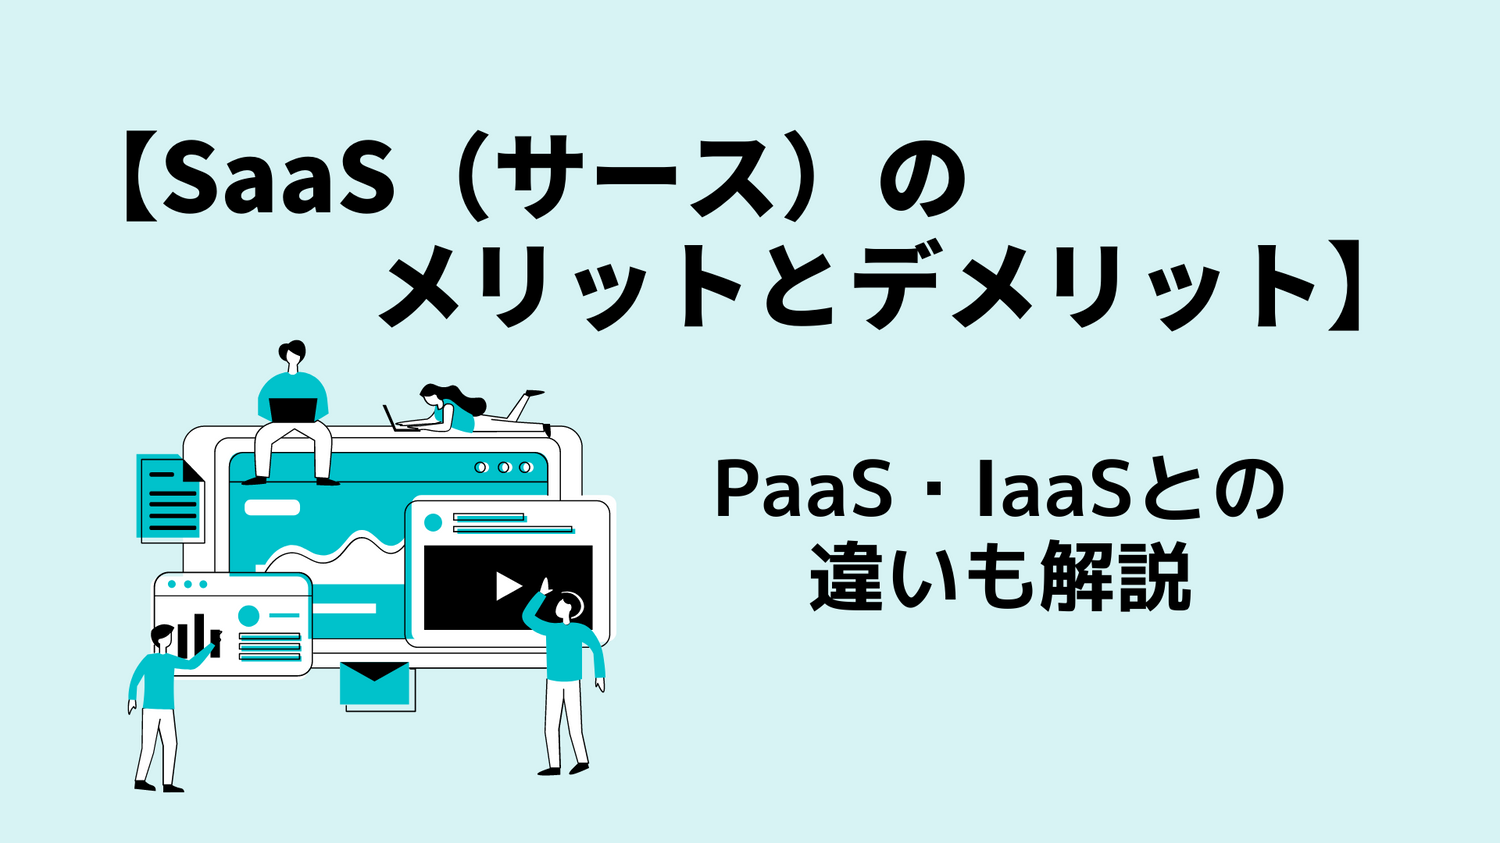 【SaaSのメリットとデメリット】PaaS・IaaSとの違いも解説